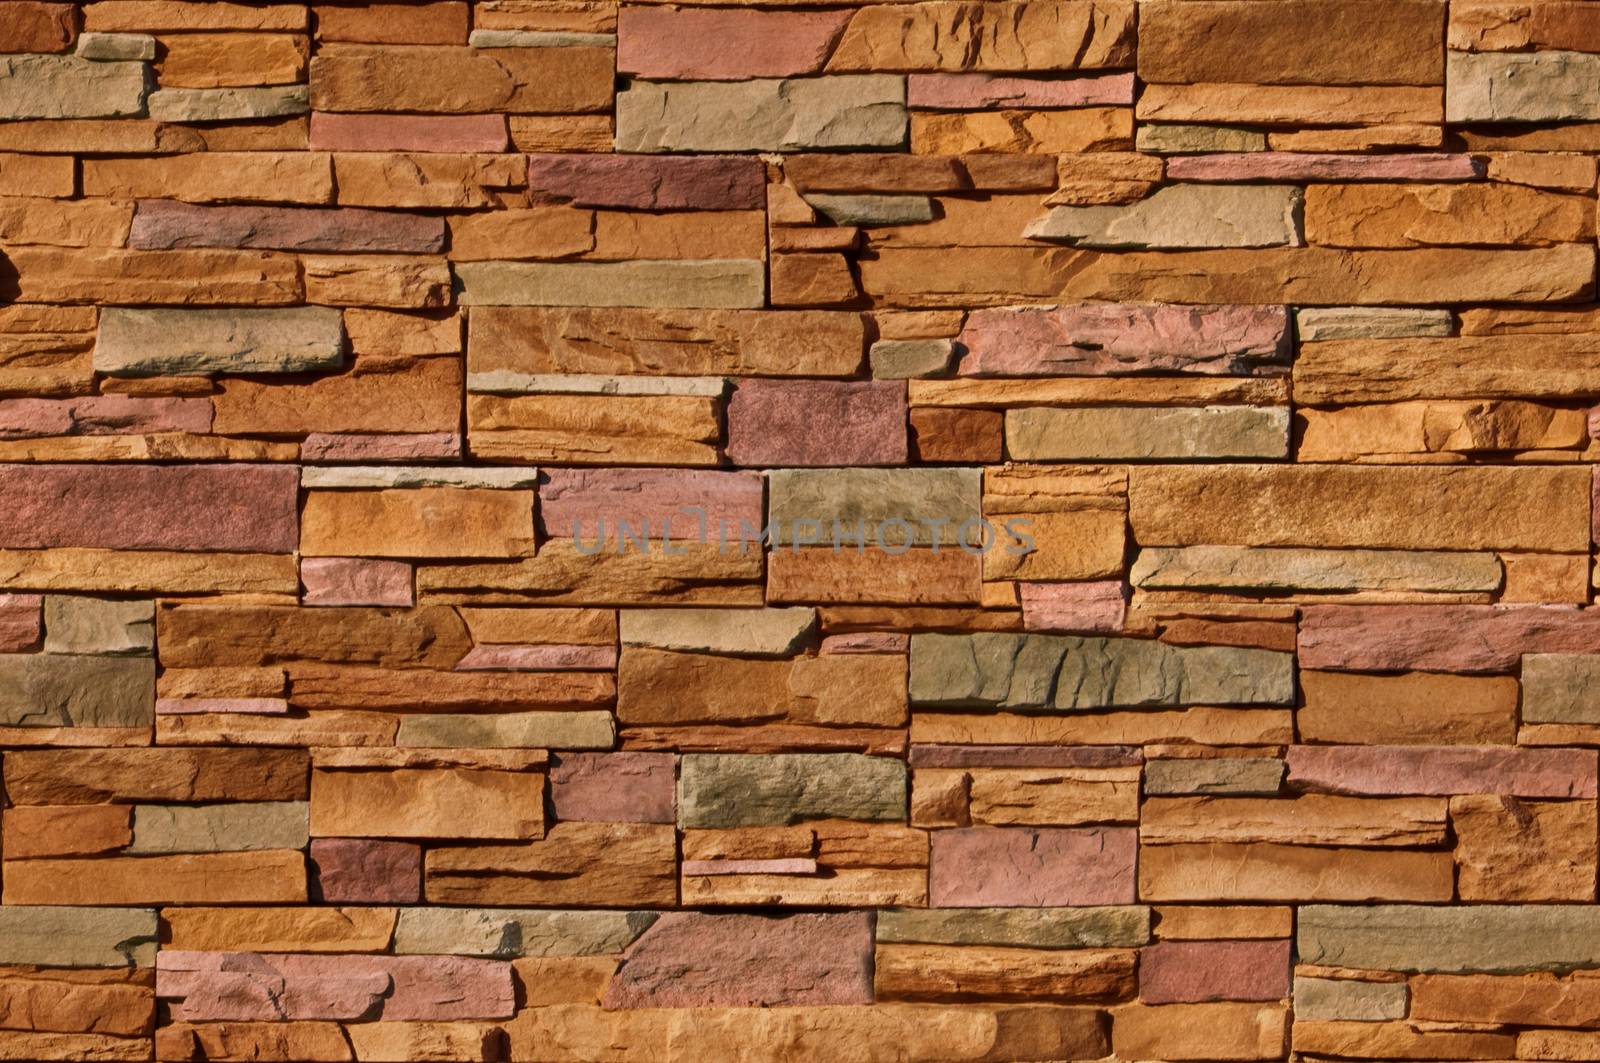 Irregular sized multi-colored bricks with an organic feel. Image is seamlessly tileable